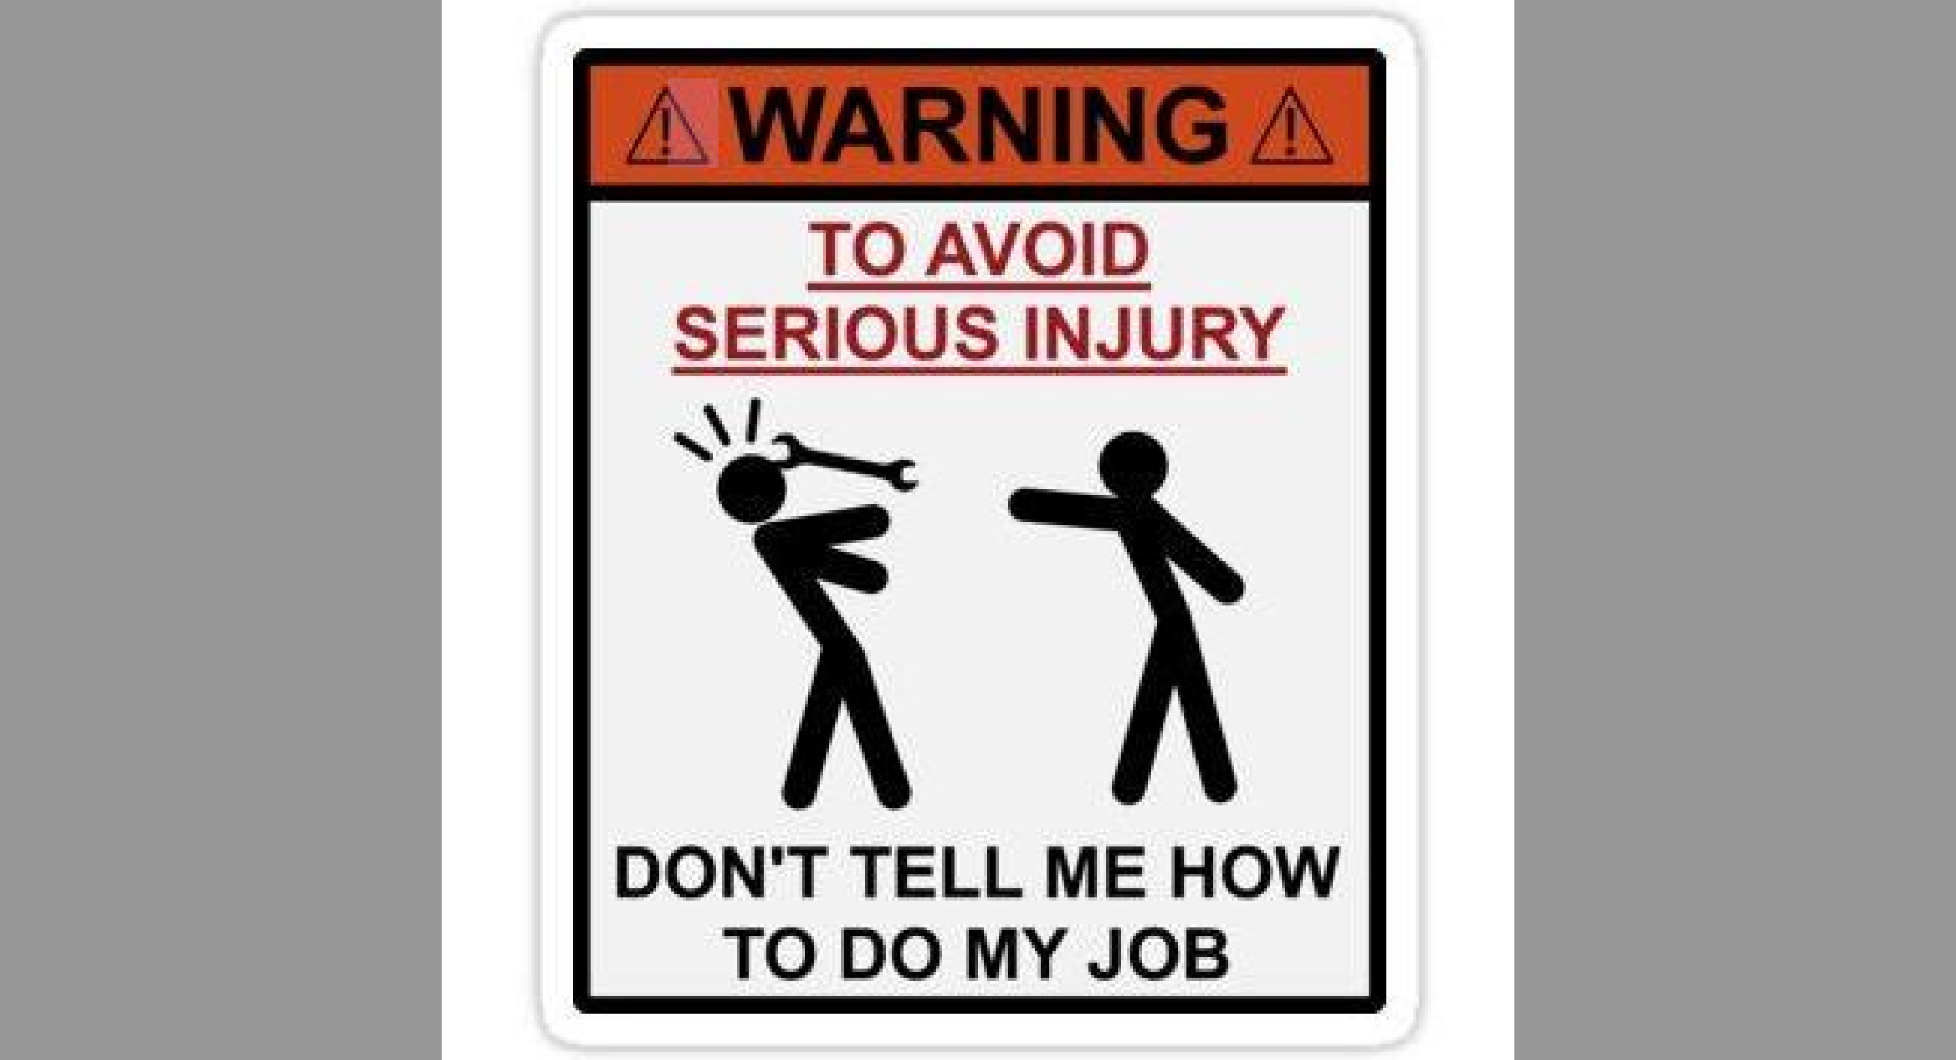 Don't tell me how to do my job. Warning don't tell me how to do my job. Don't tell me how to do my job poster. To avoid injury don't tell me how to do my job перевод.